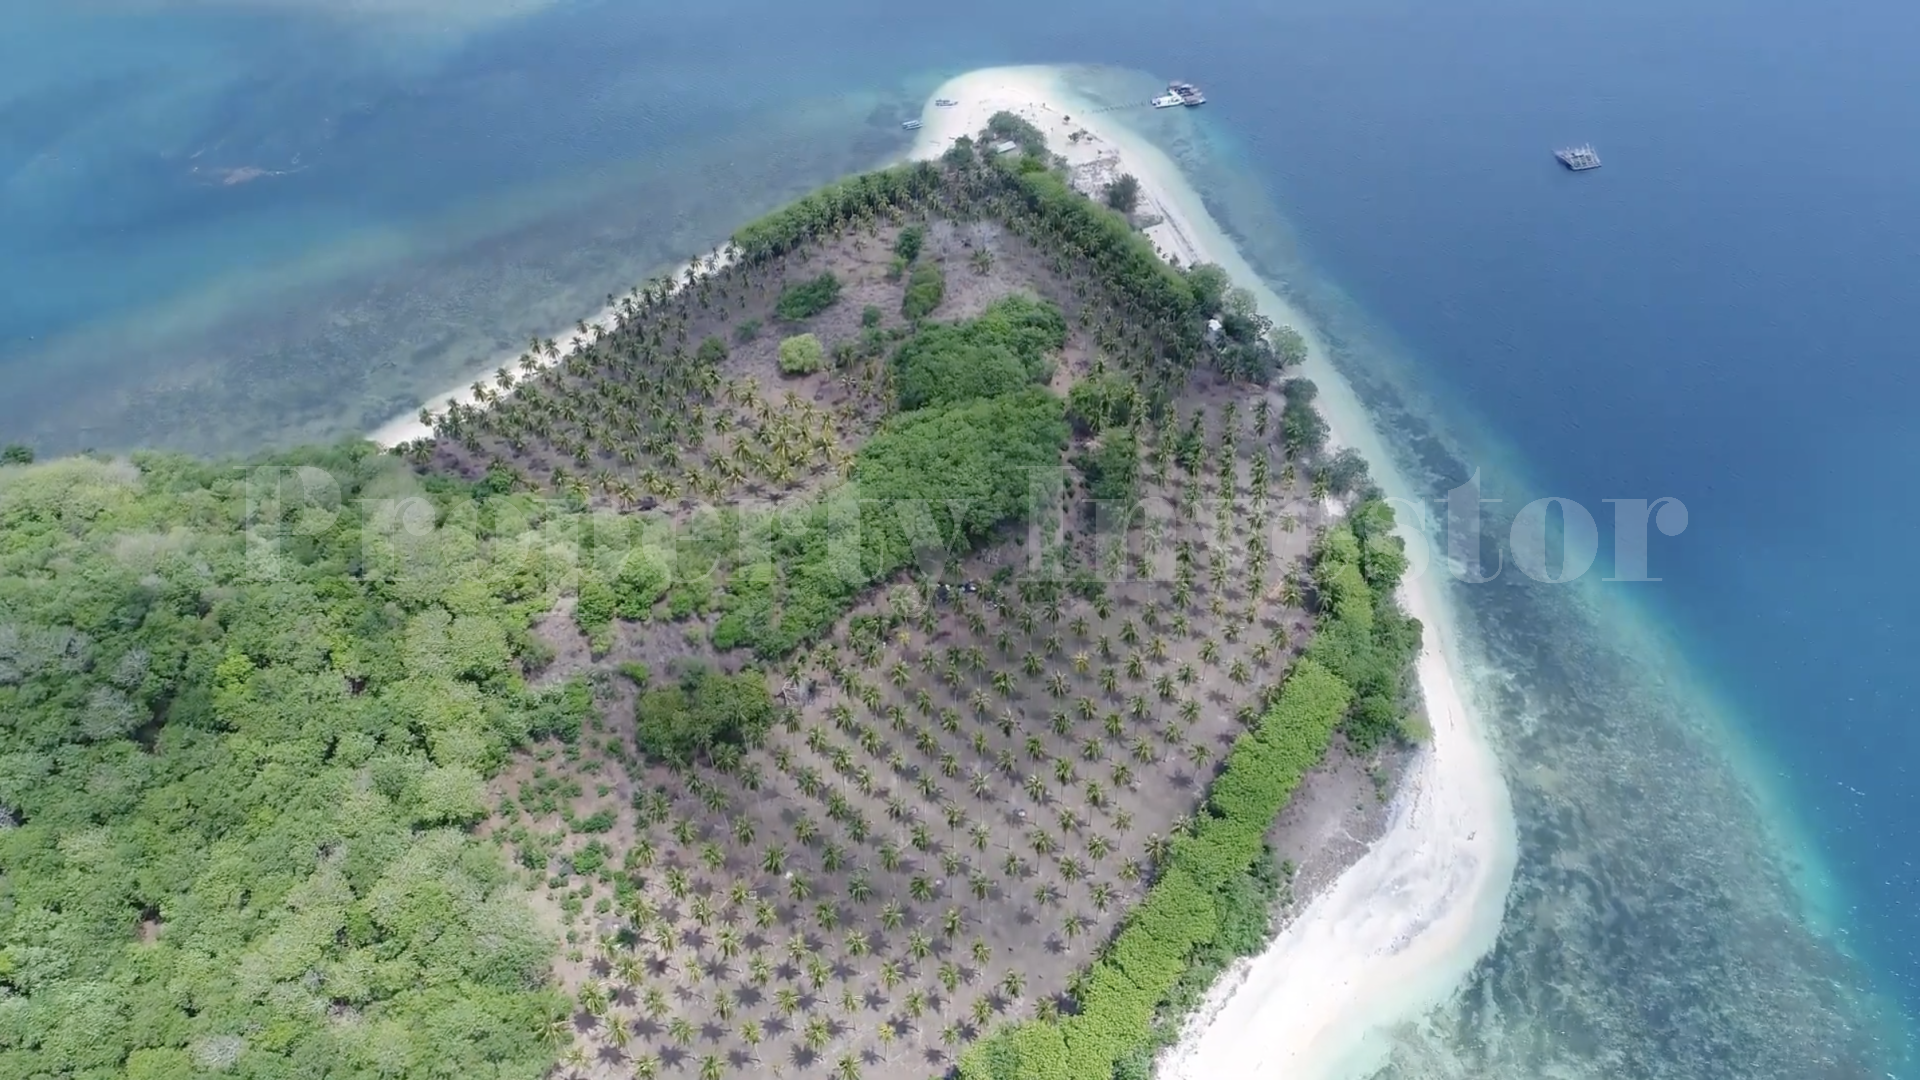 14.9 Hectare Private Virgin Island for Sale Near Lombok, Indonesia